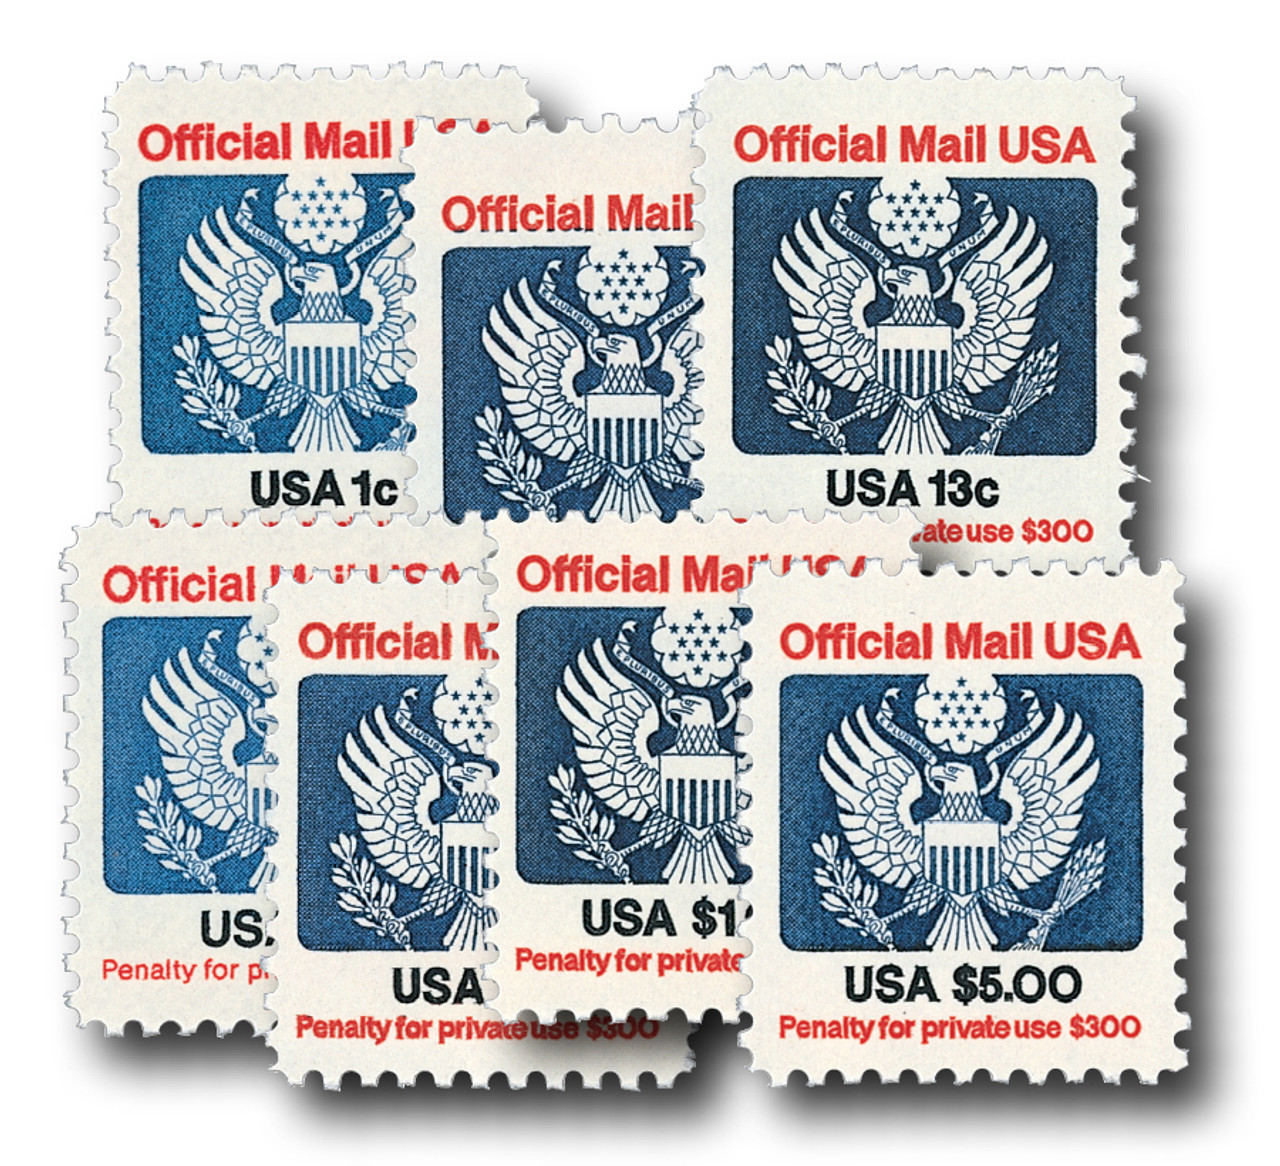 Where to Create Your Own Postage Stamp · The Typical Mom